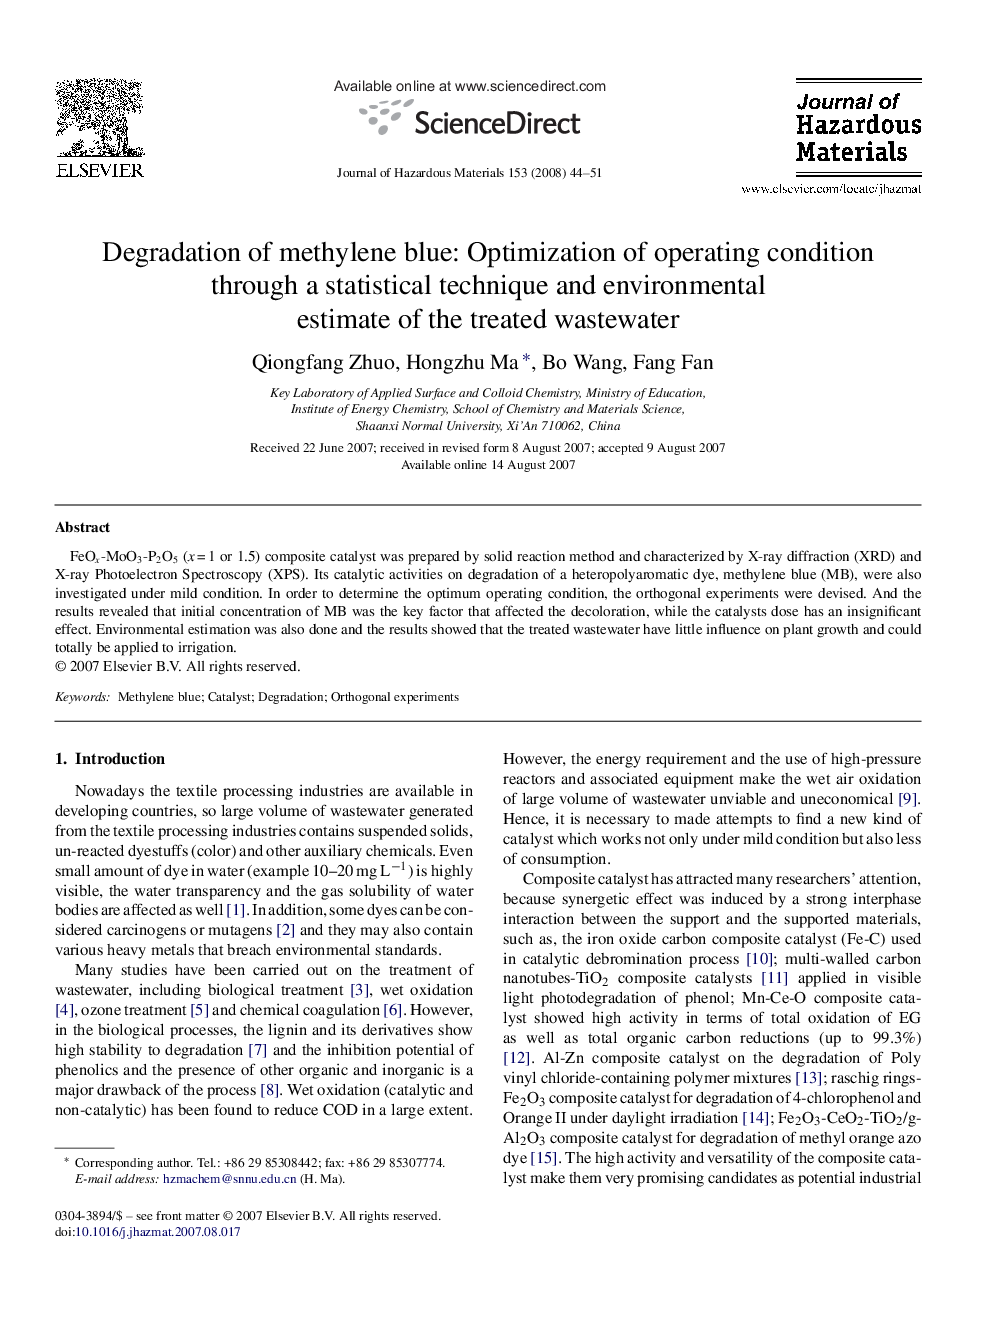 Degradation of methylene blue: Optimization of operating condition through a statistical technique and environmental estimate of the treated wastewater